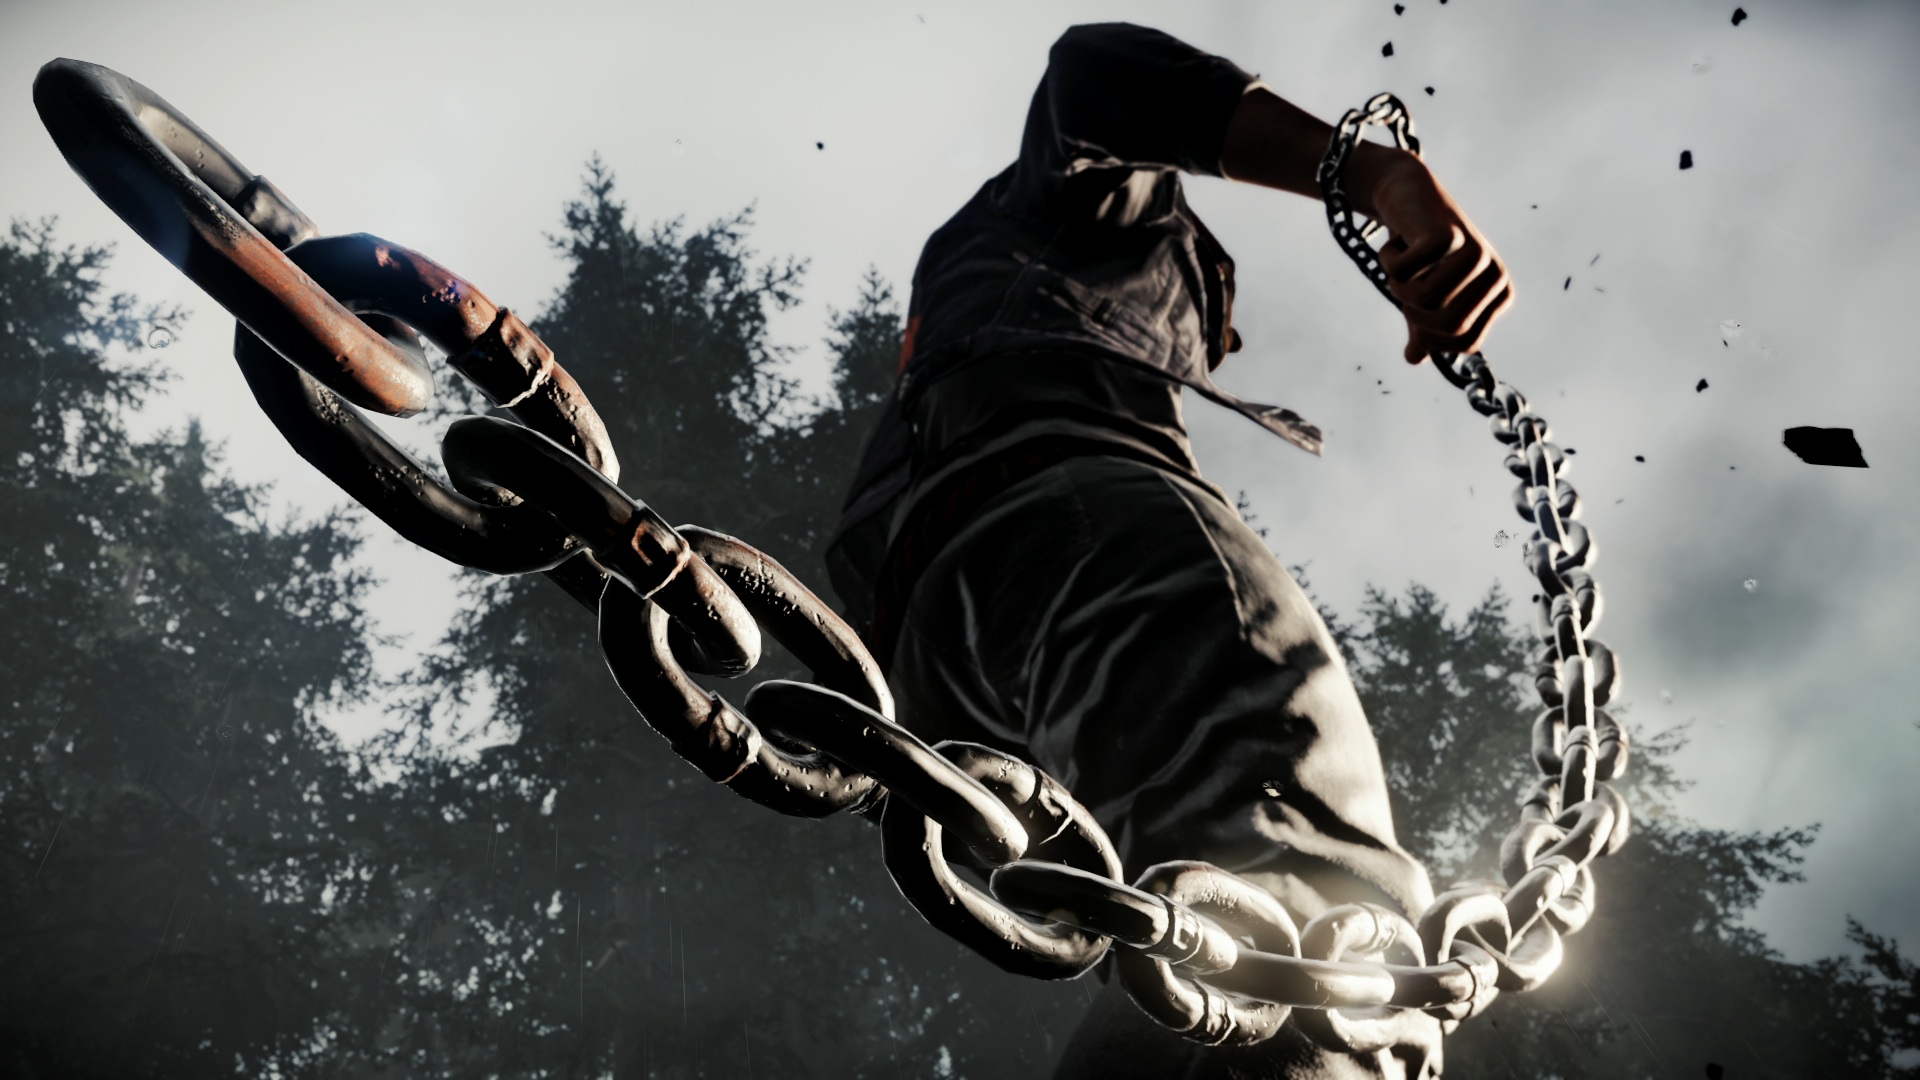 infamous second son wallpaper,photography,graphic design,street dance,rope,fashion accessory